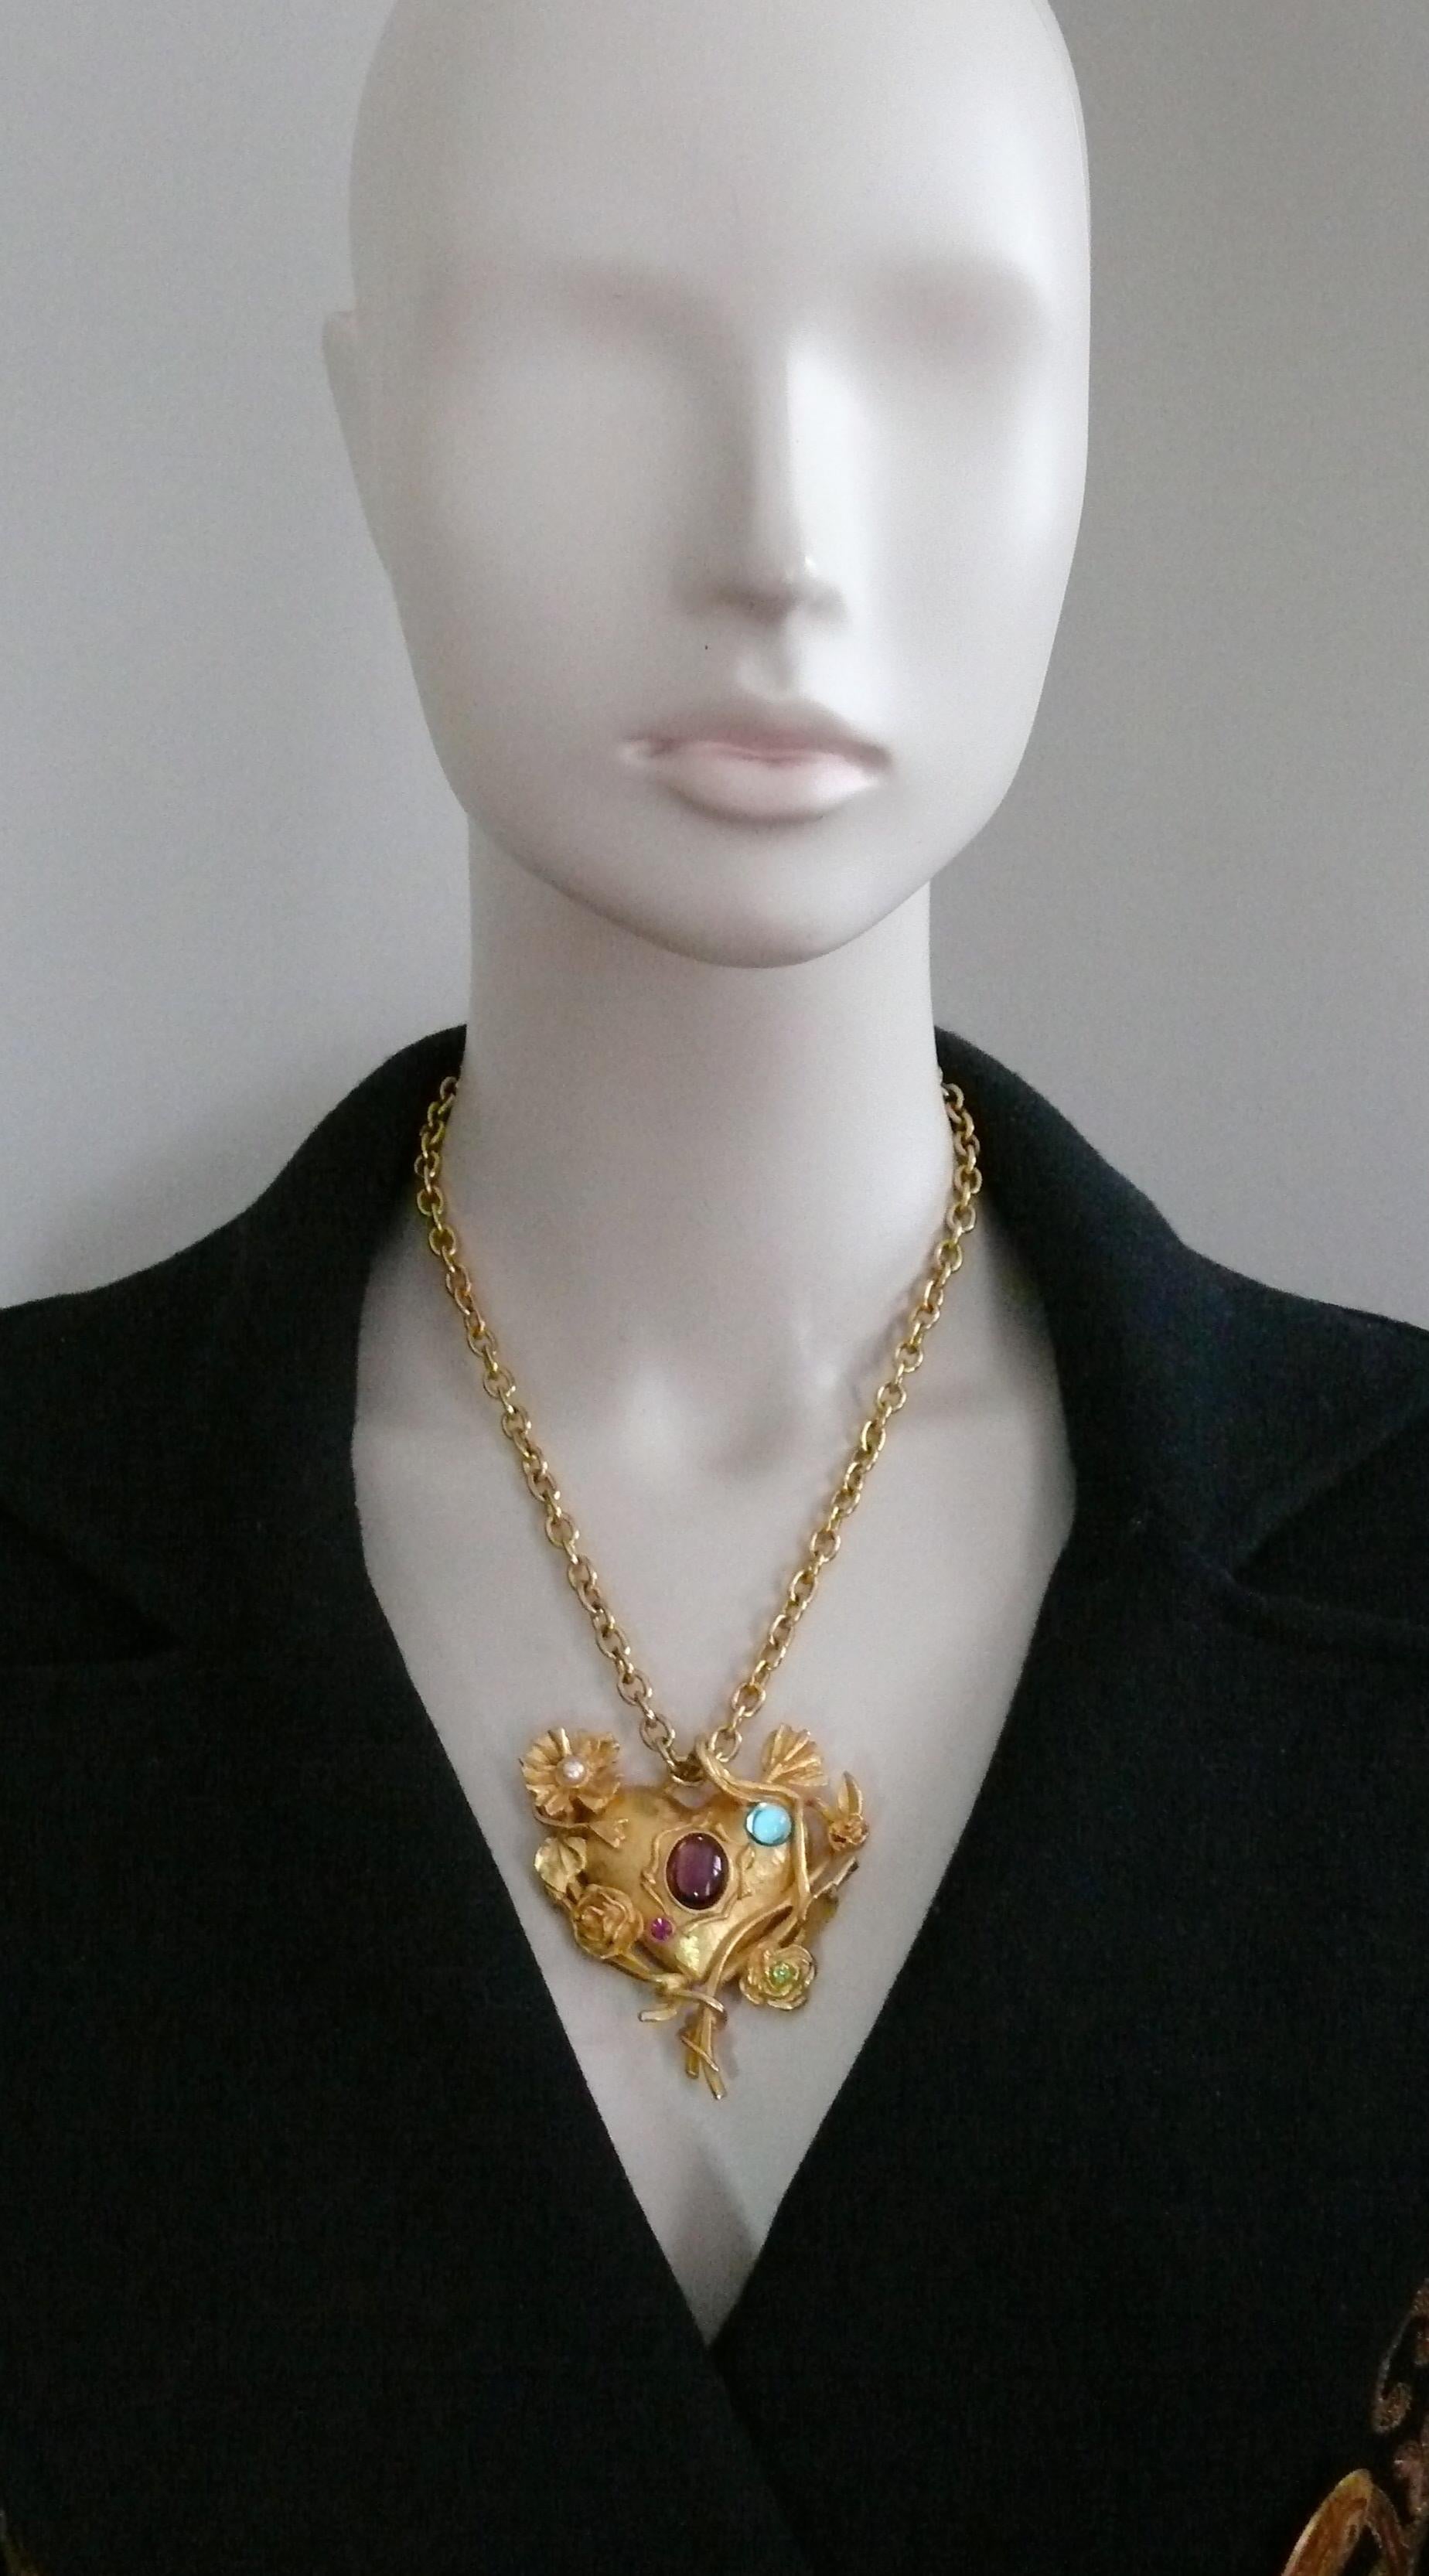 CHRISTIAN LACROIX vintage gold toned chain pendant necklace featuring a jewelled and mirrored floral heart embellished with blue and purple glass cabochons, faux pearl and multicolored crystals.

Adjustable hook closure.

Marked CHRISTIAN LACROIX CL